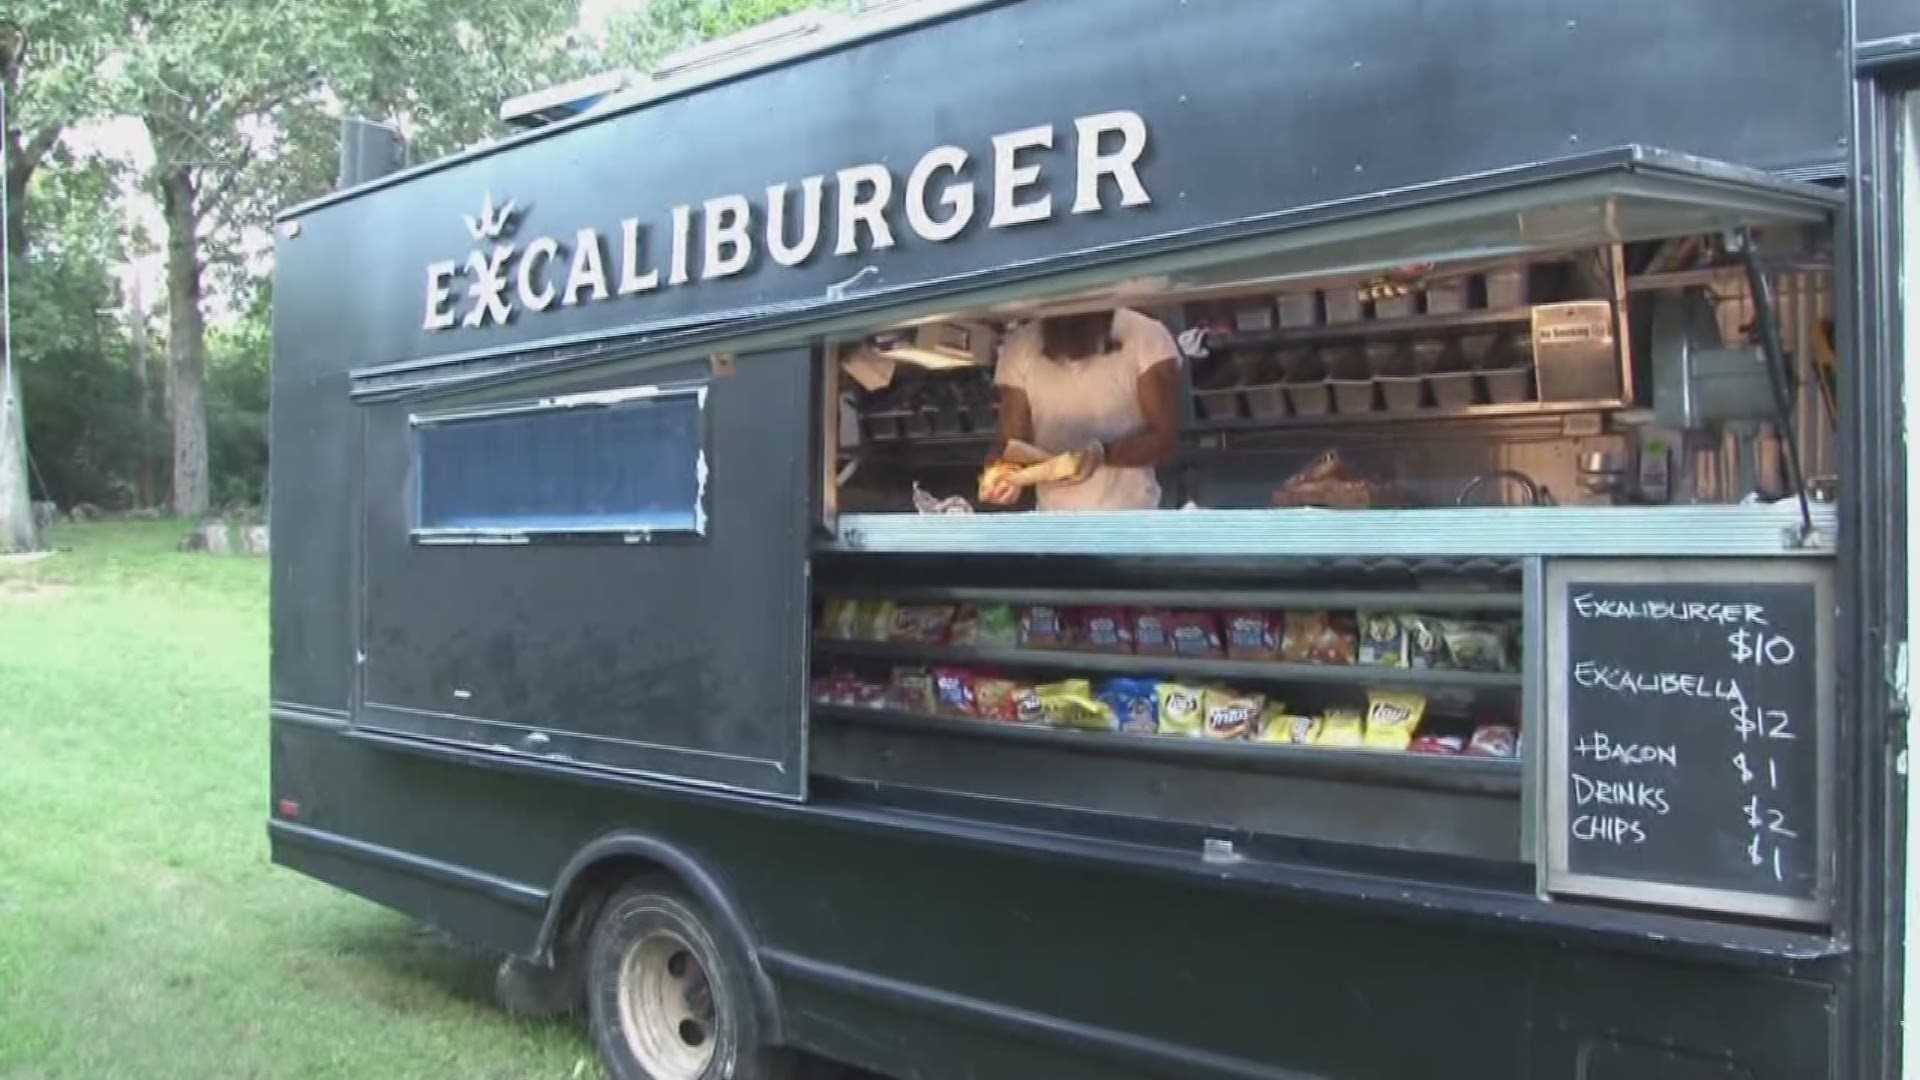 An Arkansan who's known for feeding people in need is opening his food truck once again to help feed federal workers.